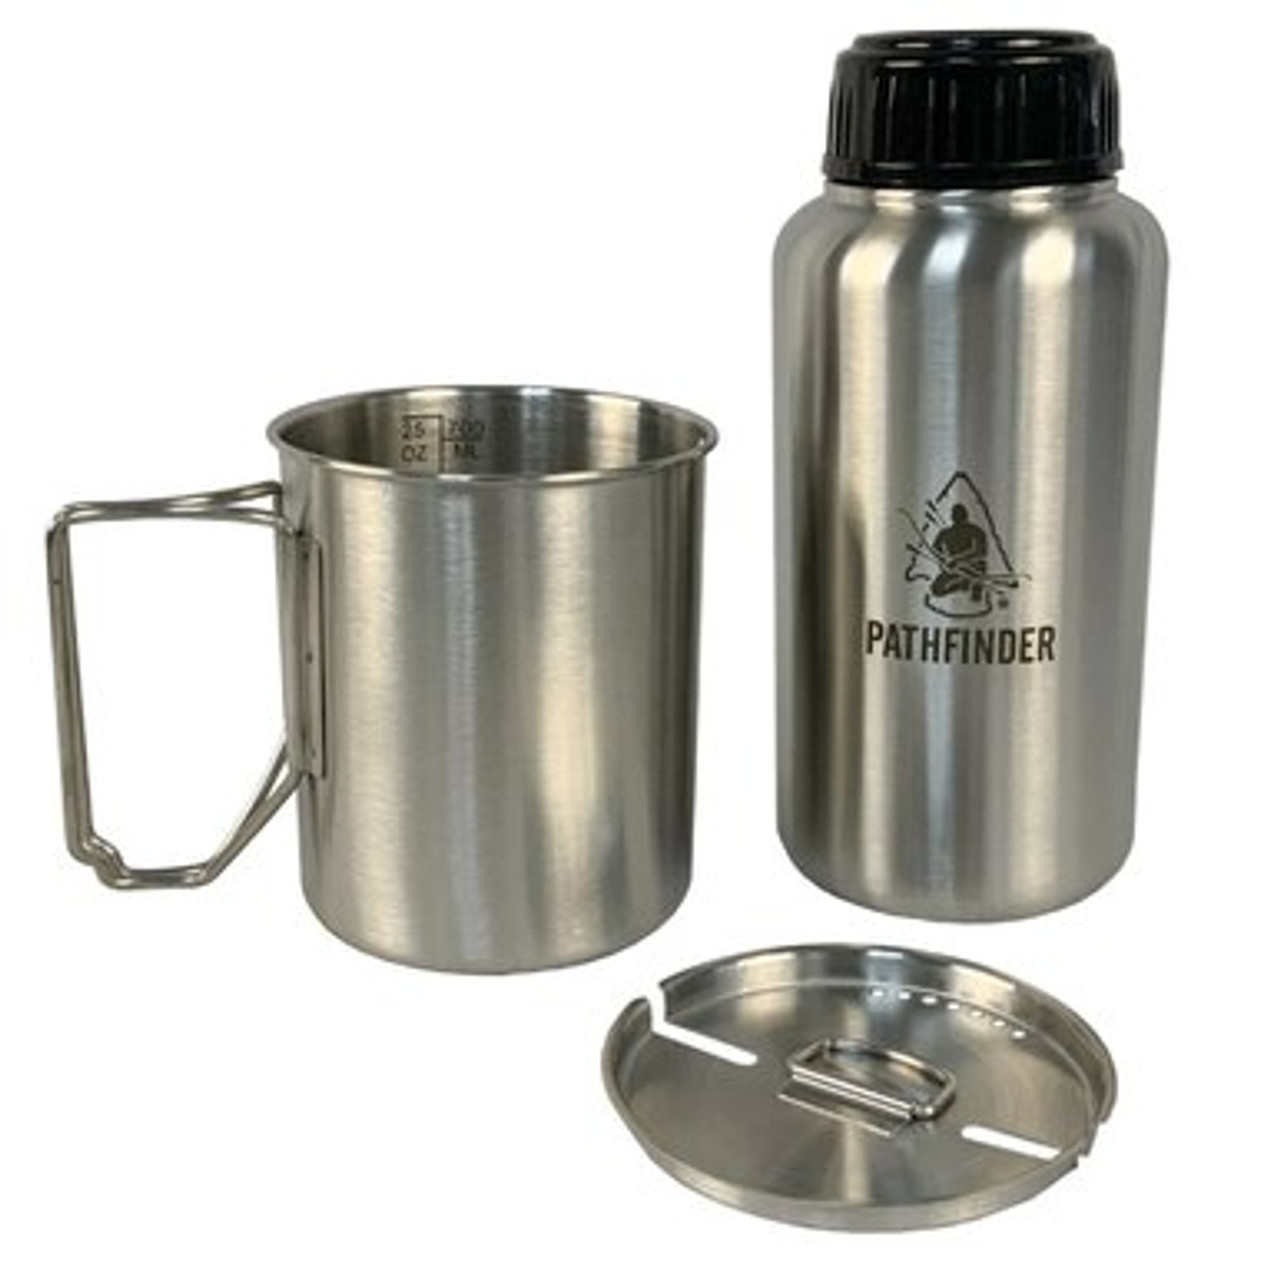 https://cdn11.bigcommerce.com/s-ovptlwt64t/images/stencil/1280x1280/products/609/1933/32OZ-STAINLESS-STEEL-WATER-BOTTLE-AND-NESTING-CUP-SET__17300.1593789690.jpg?c=1